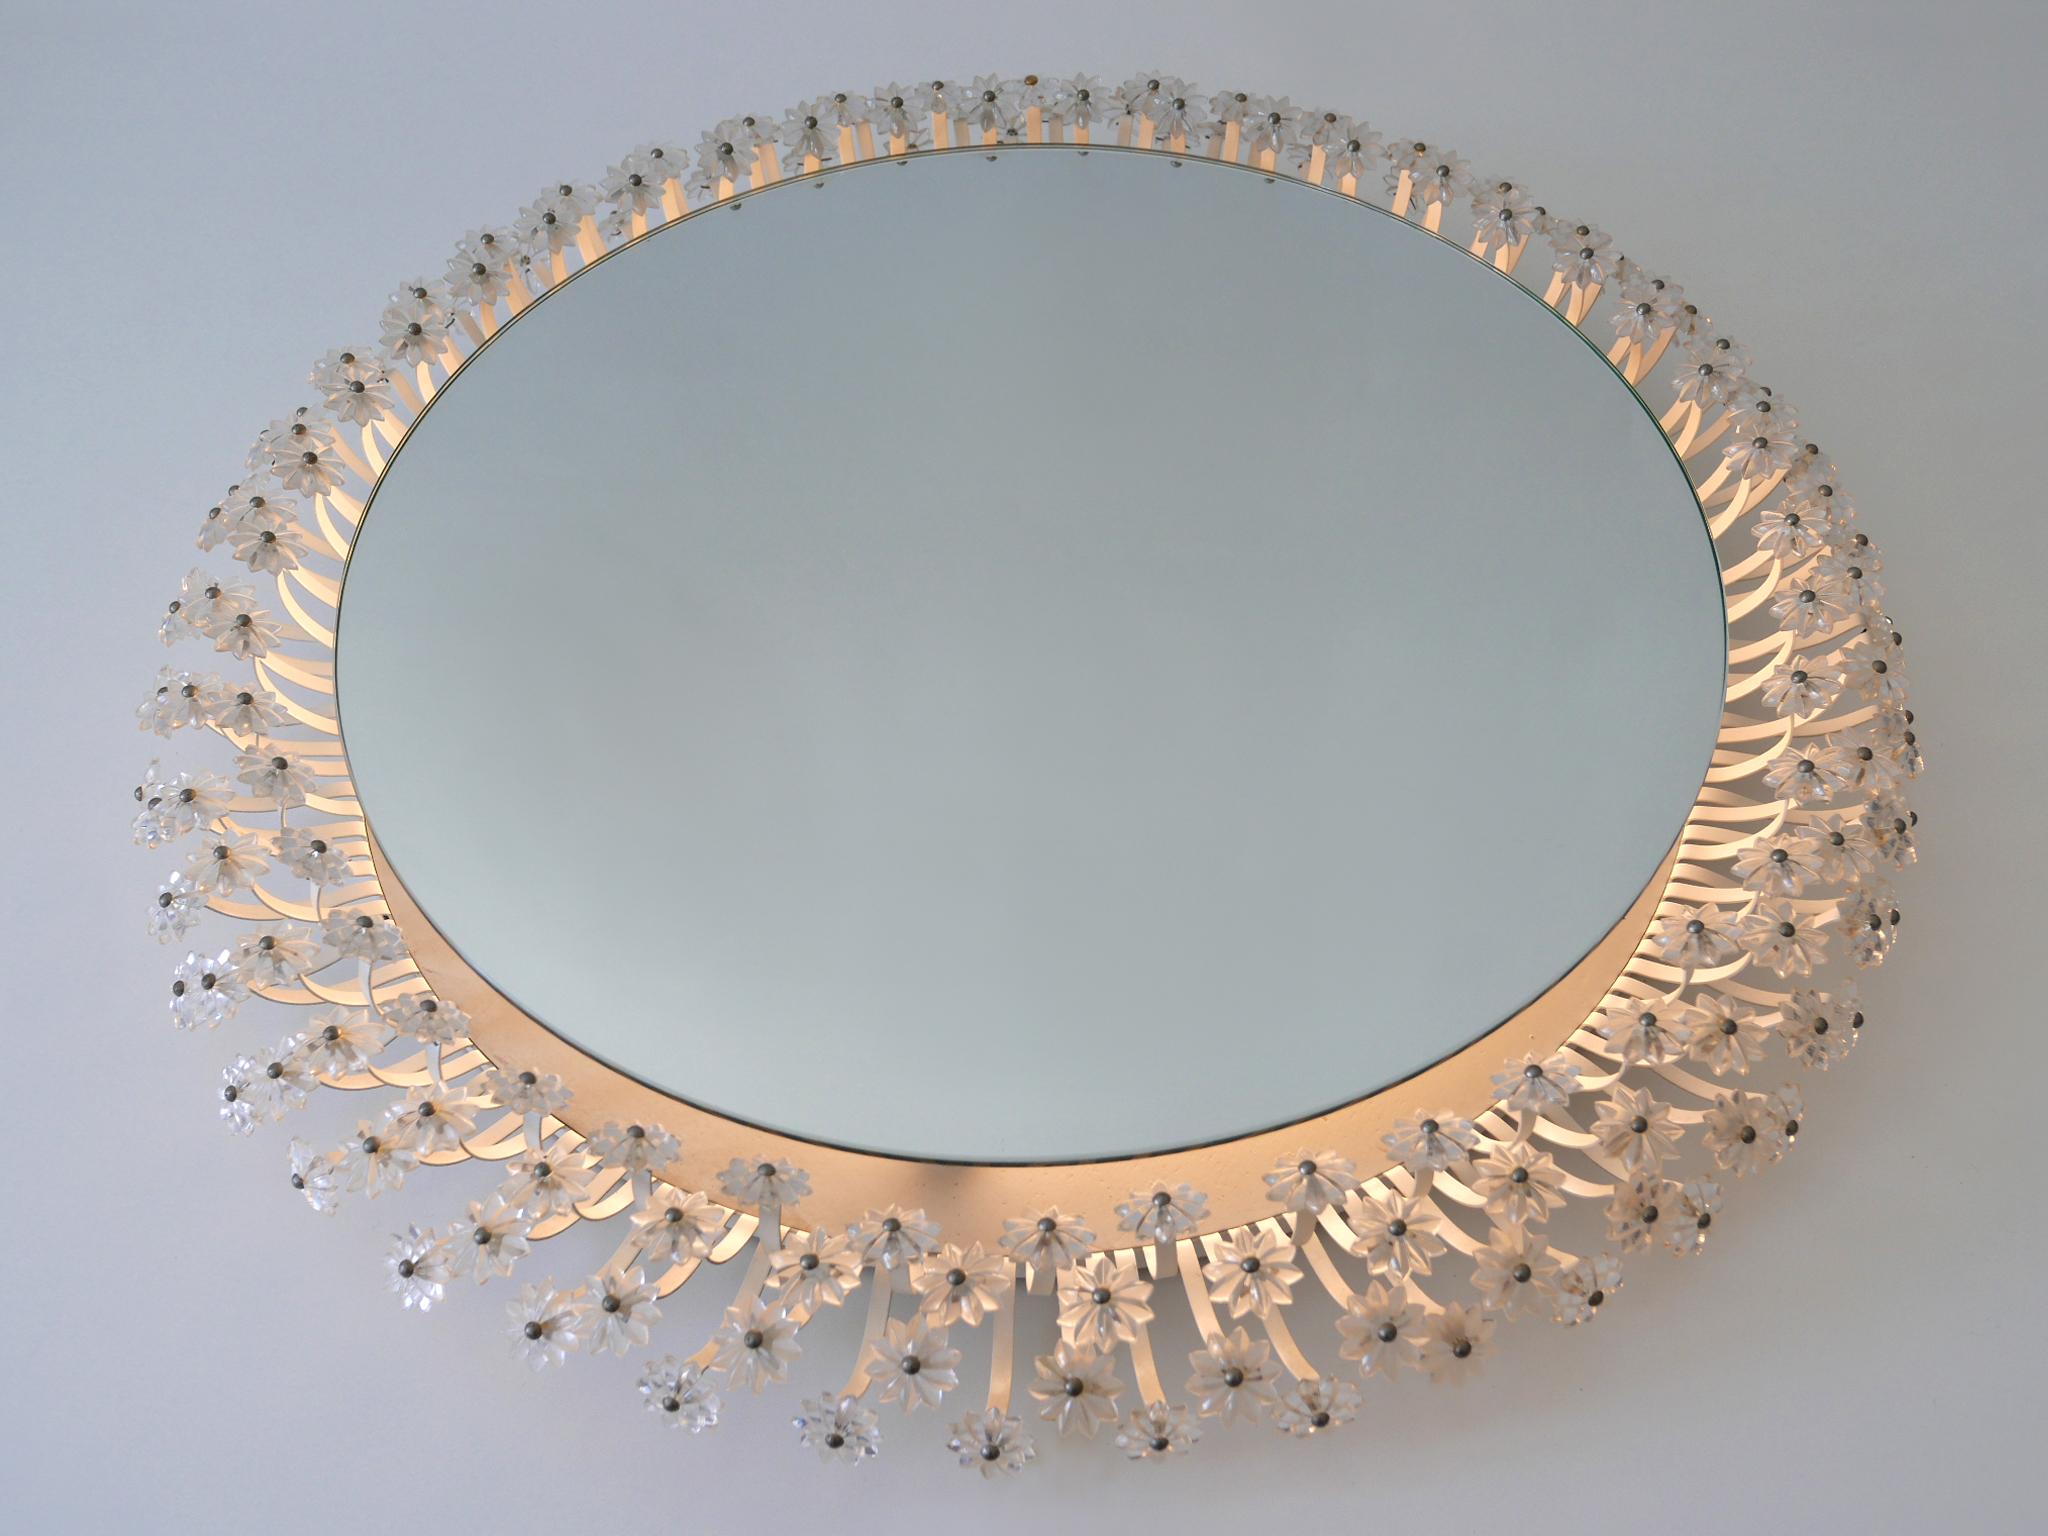 Mid-20th Century Decorative Mid-Century Modern Backlit Wall Mirror by Schöninger Germany 1960s For Sale